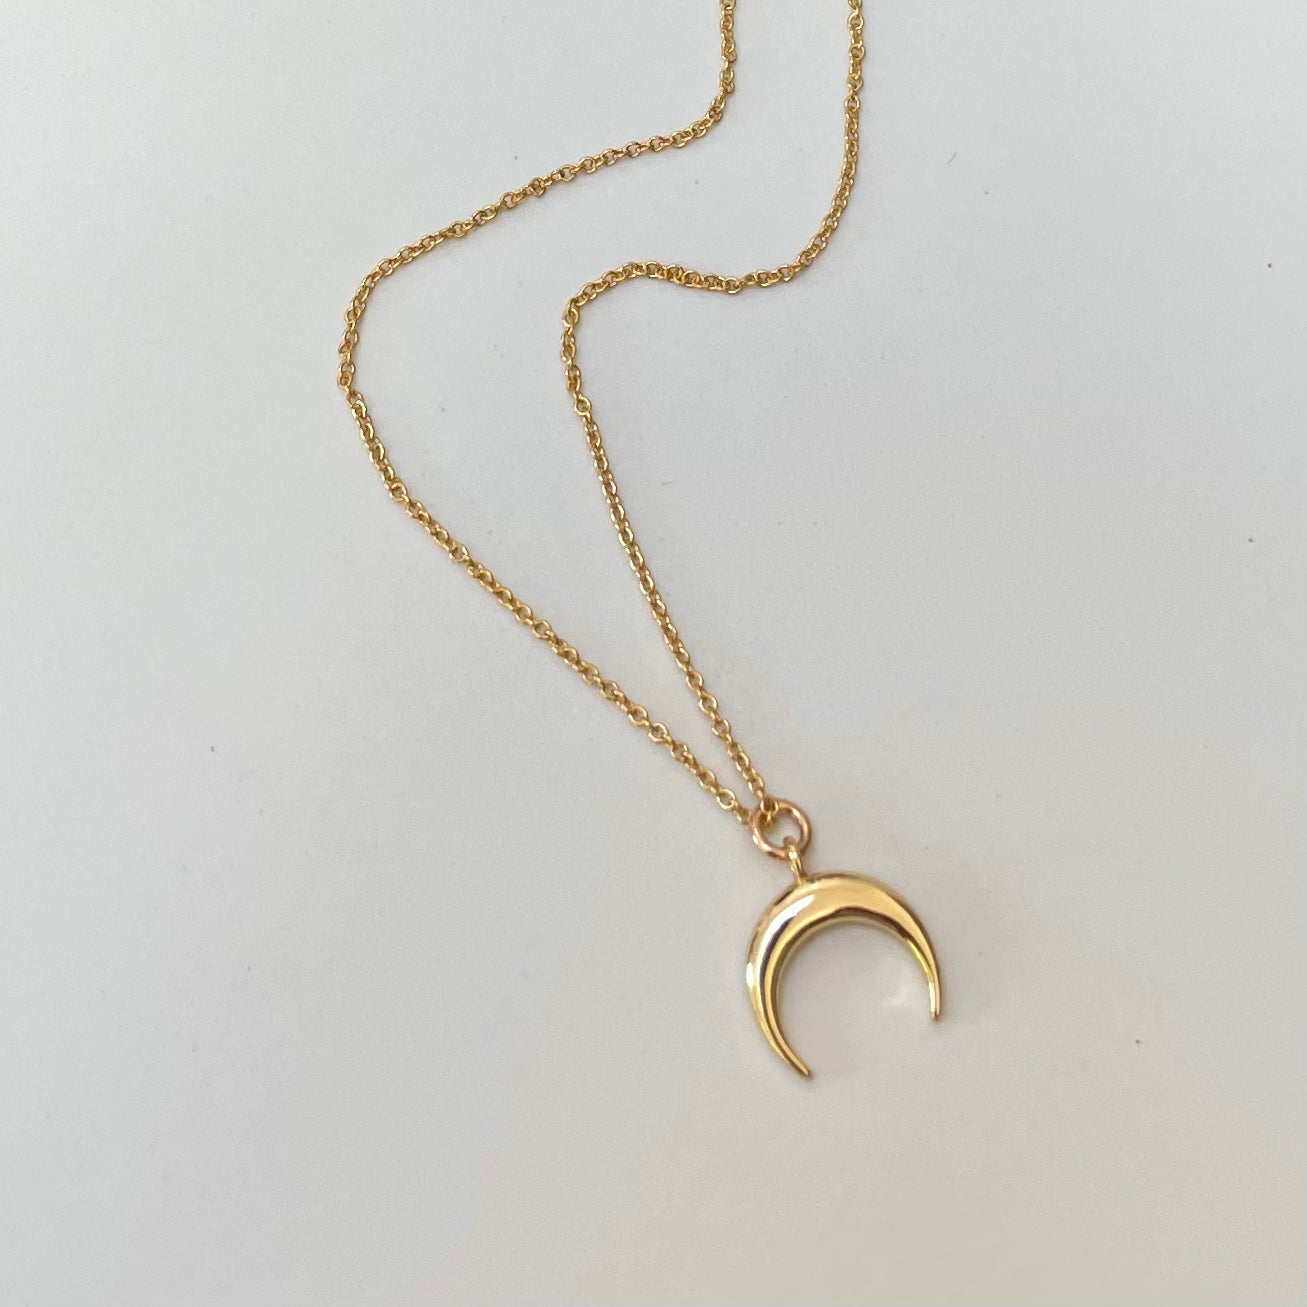 Luna moon necklace 18" gold filled chain 